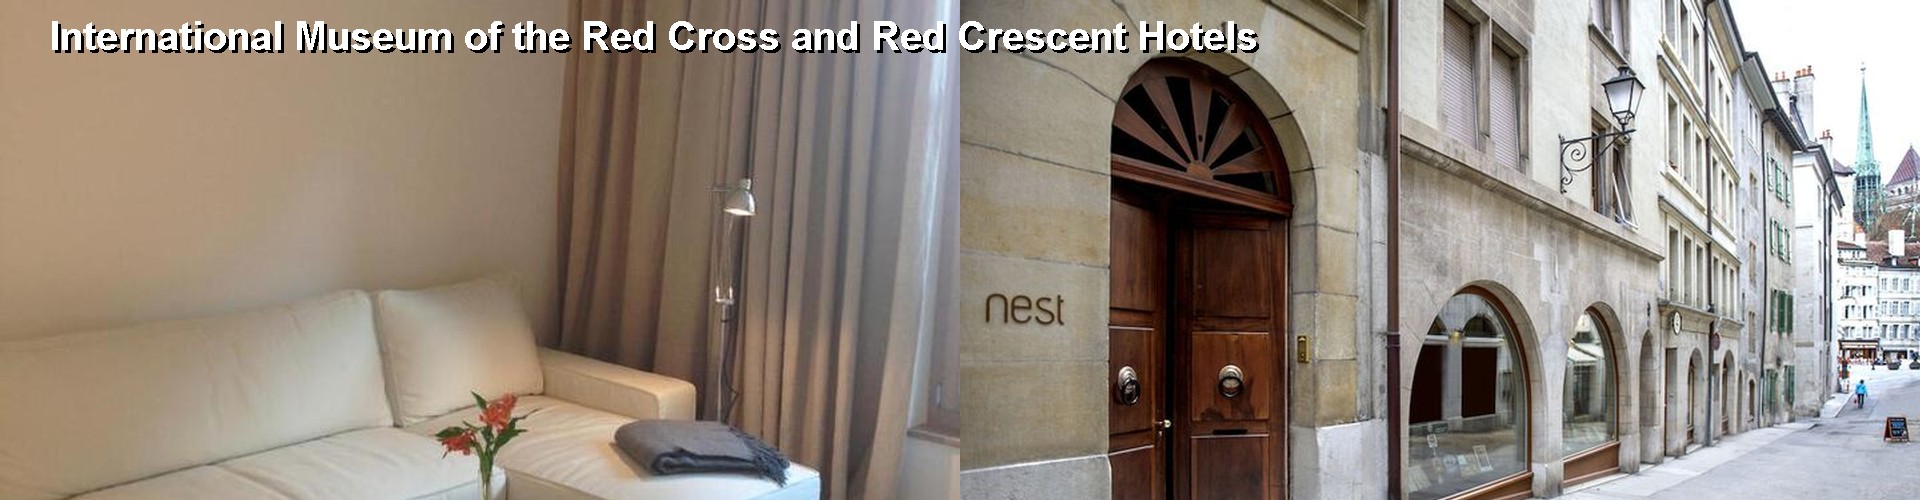 5 Best Hotels near International Museum of the Red Cross and Red Crescent